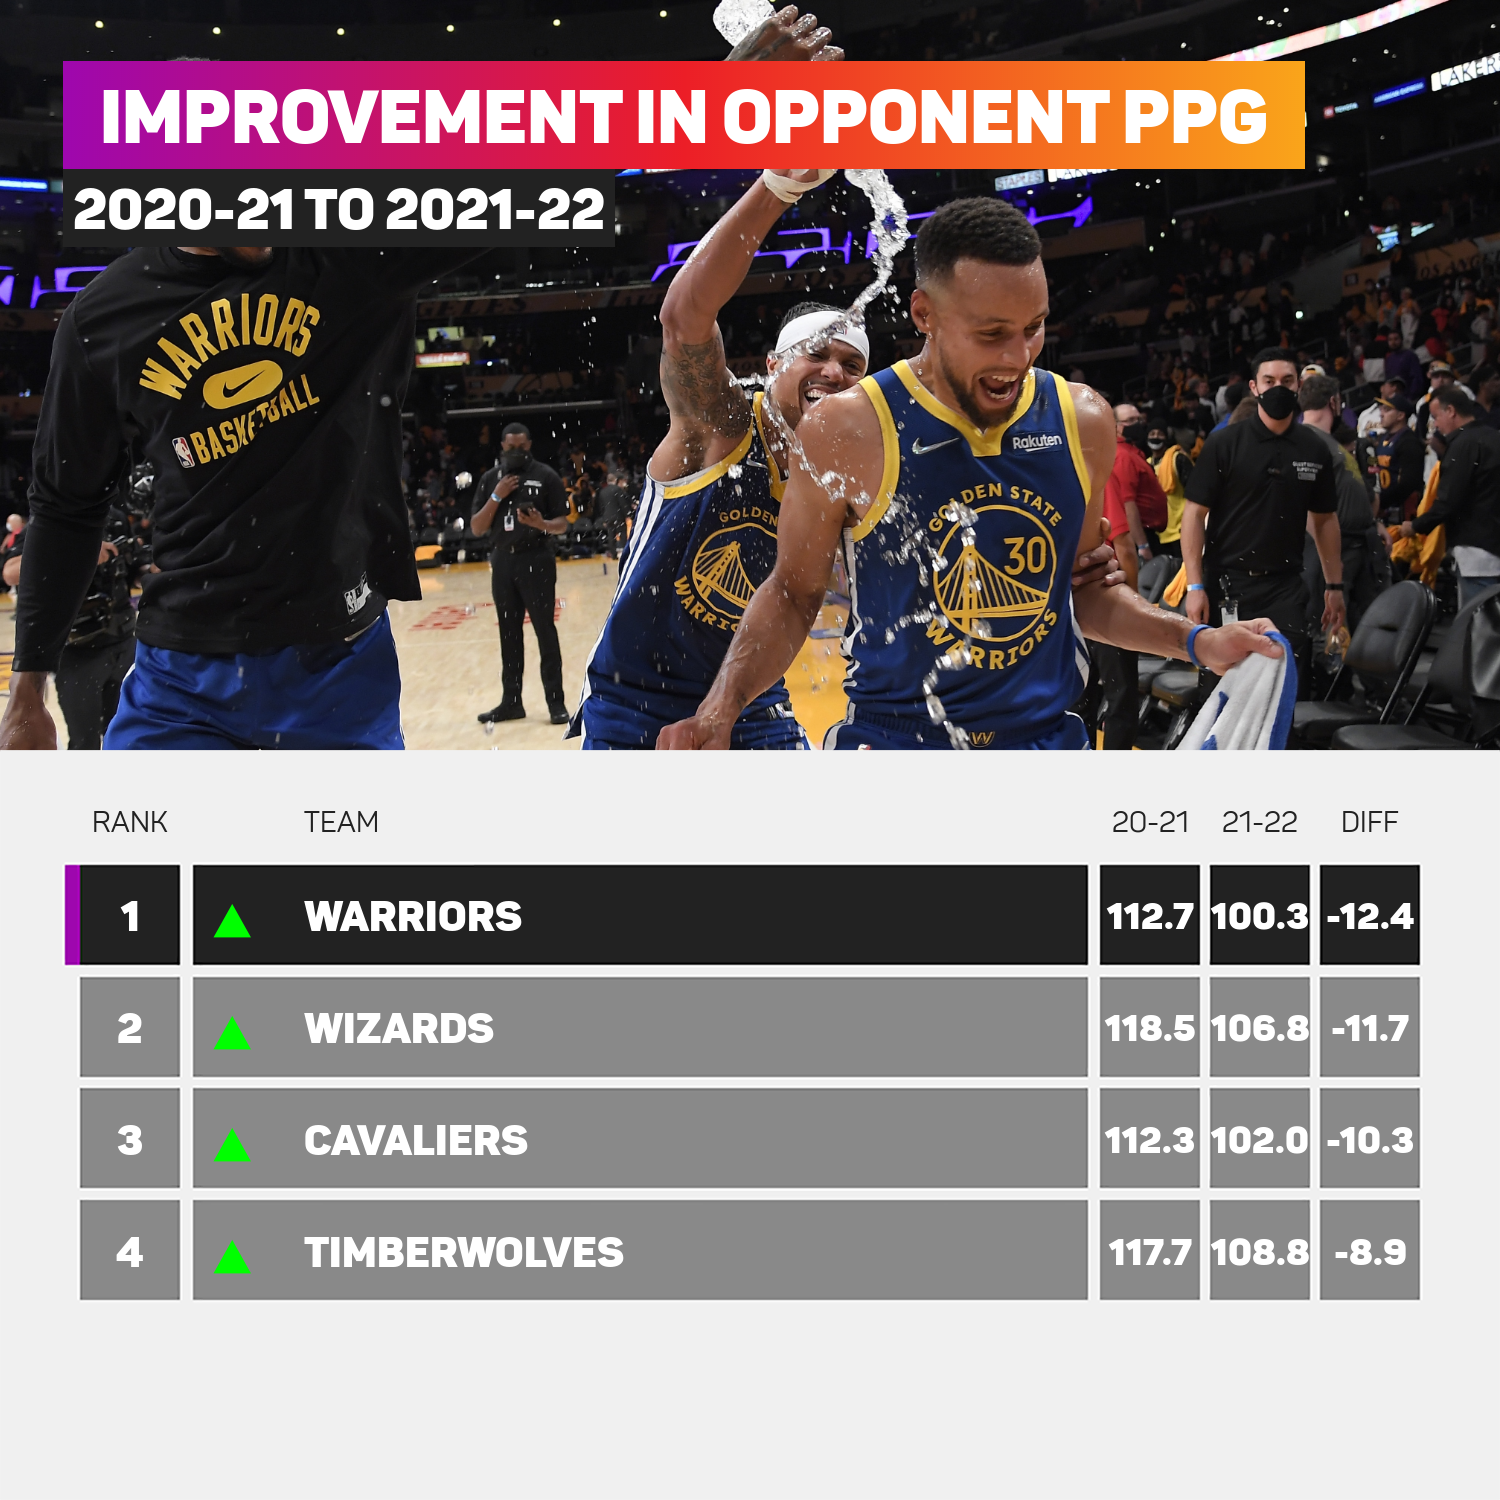 Improvement in opponent ppg